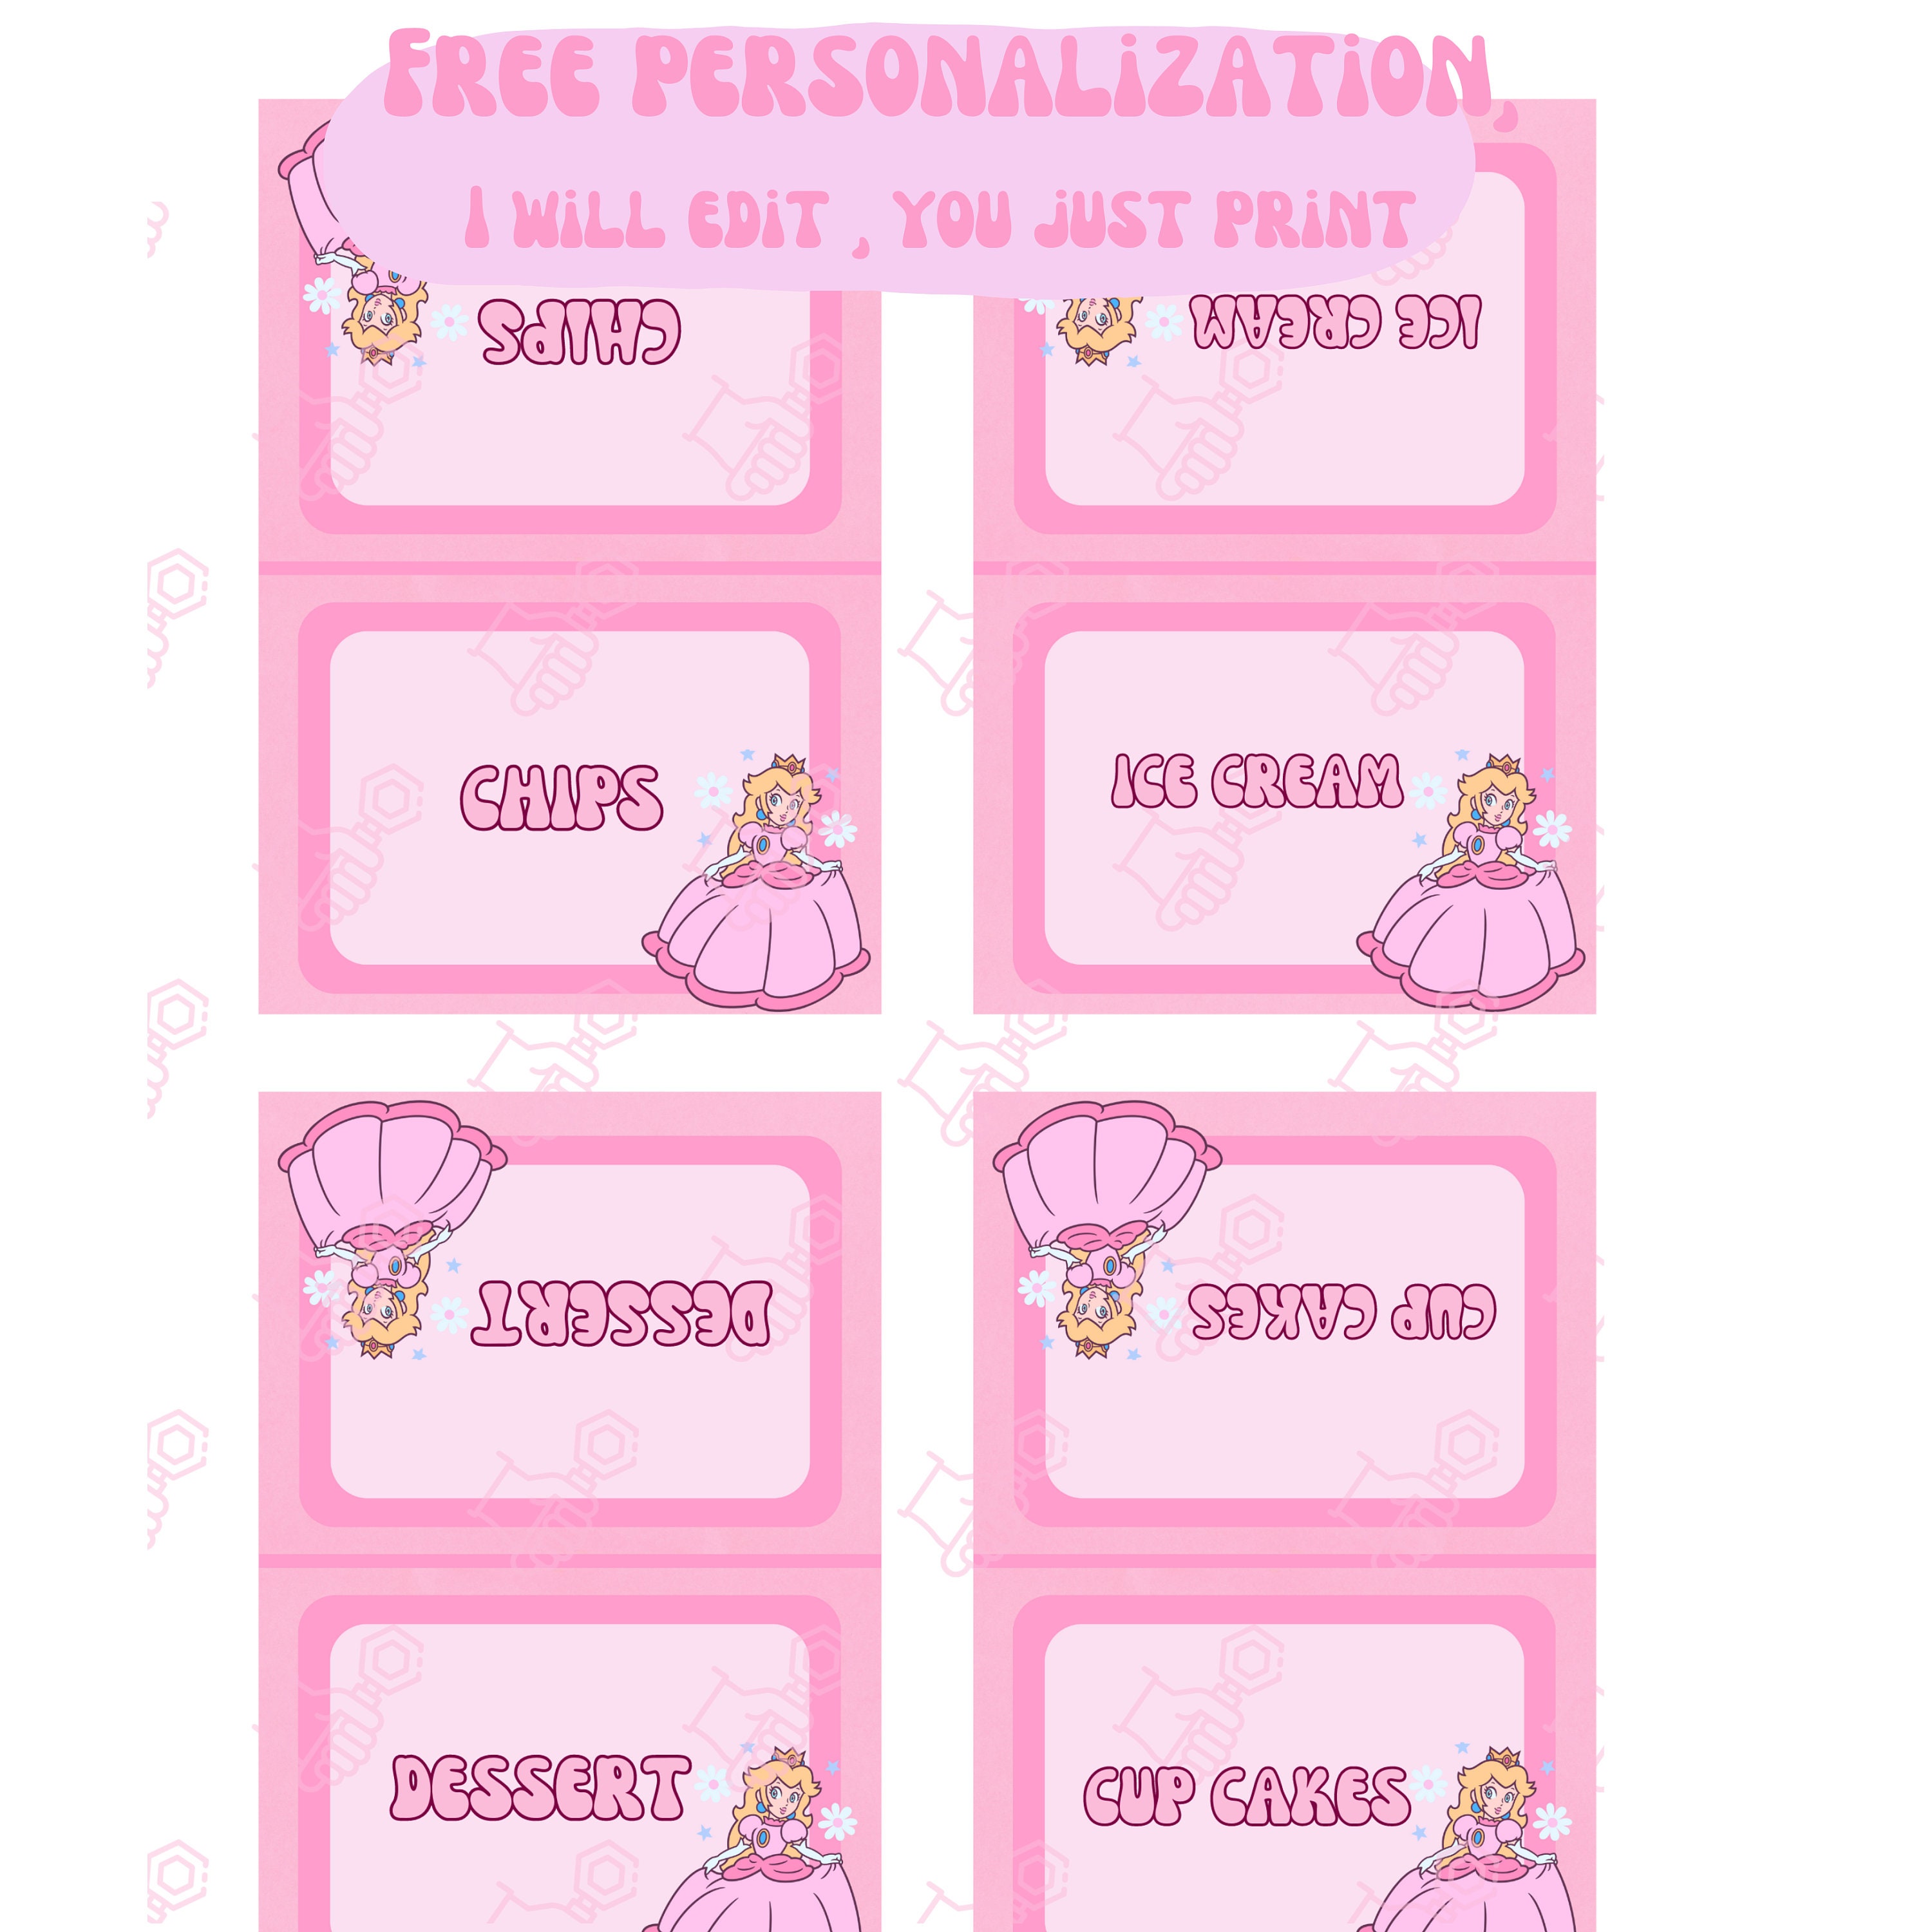 Mario Princess Peach Birthday Party Supplies, Pin the Sticker on the Party  Game Poster, Mario Princess Peach Party Favors, Mario Princess Peach Party